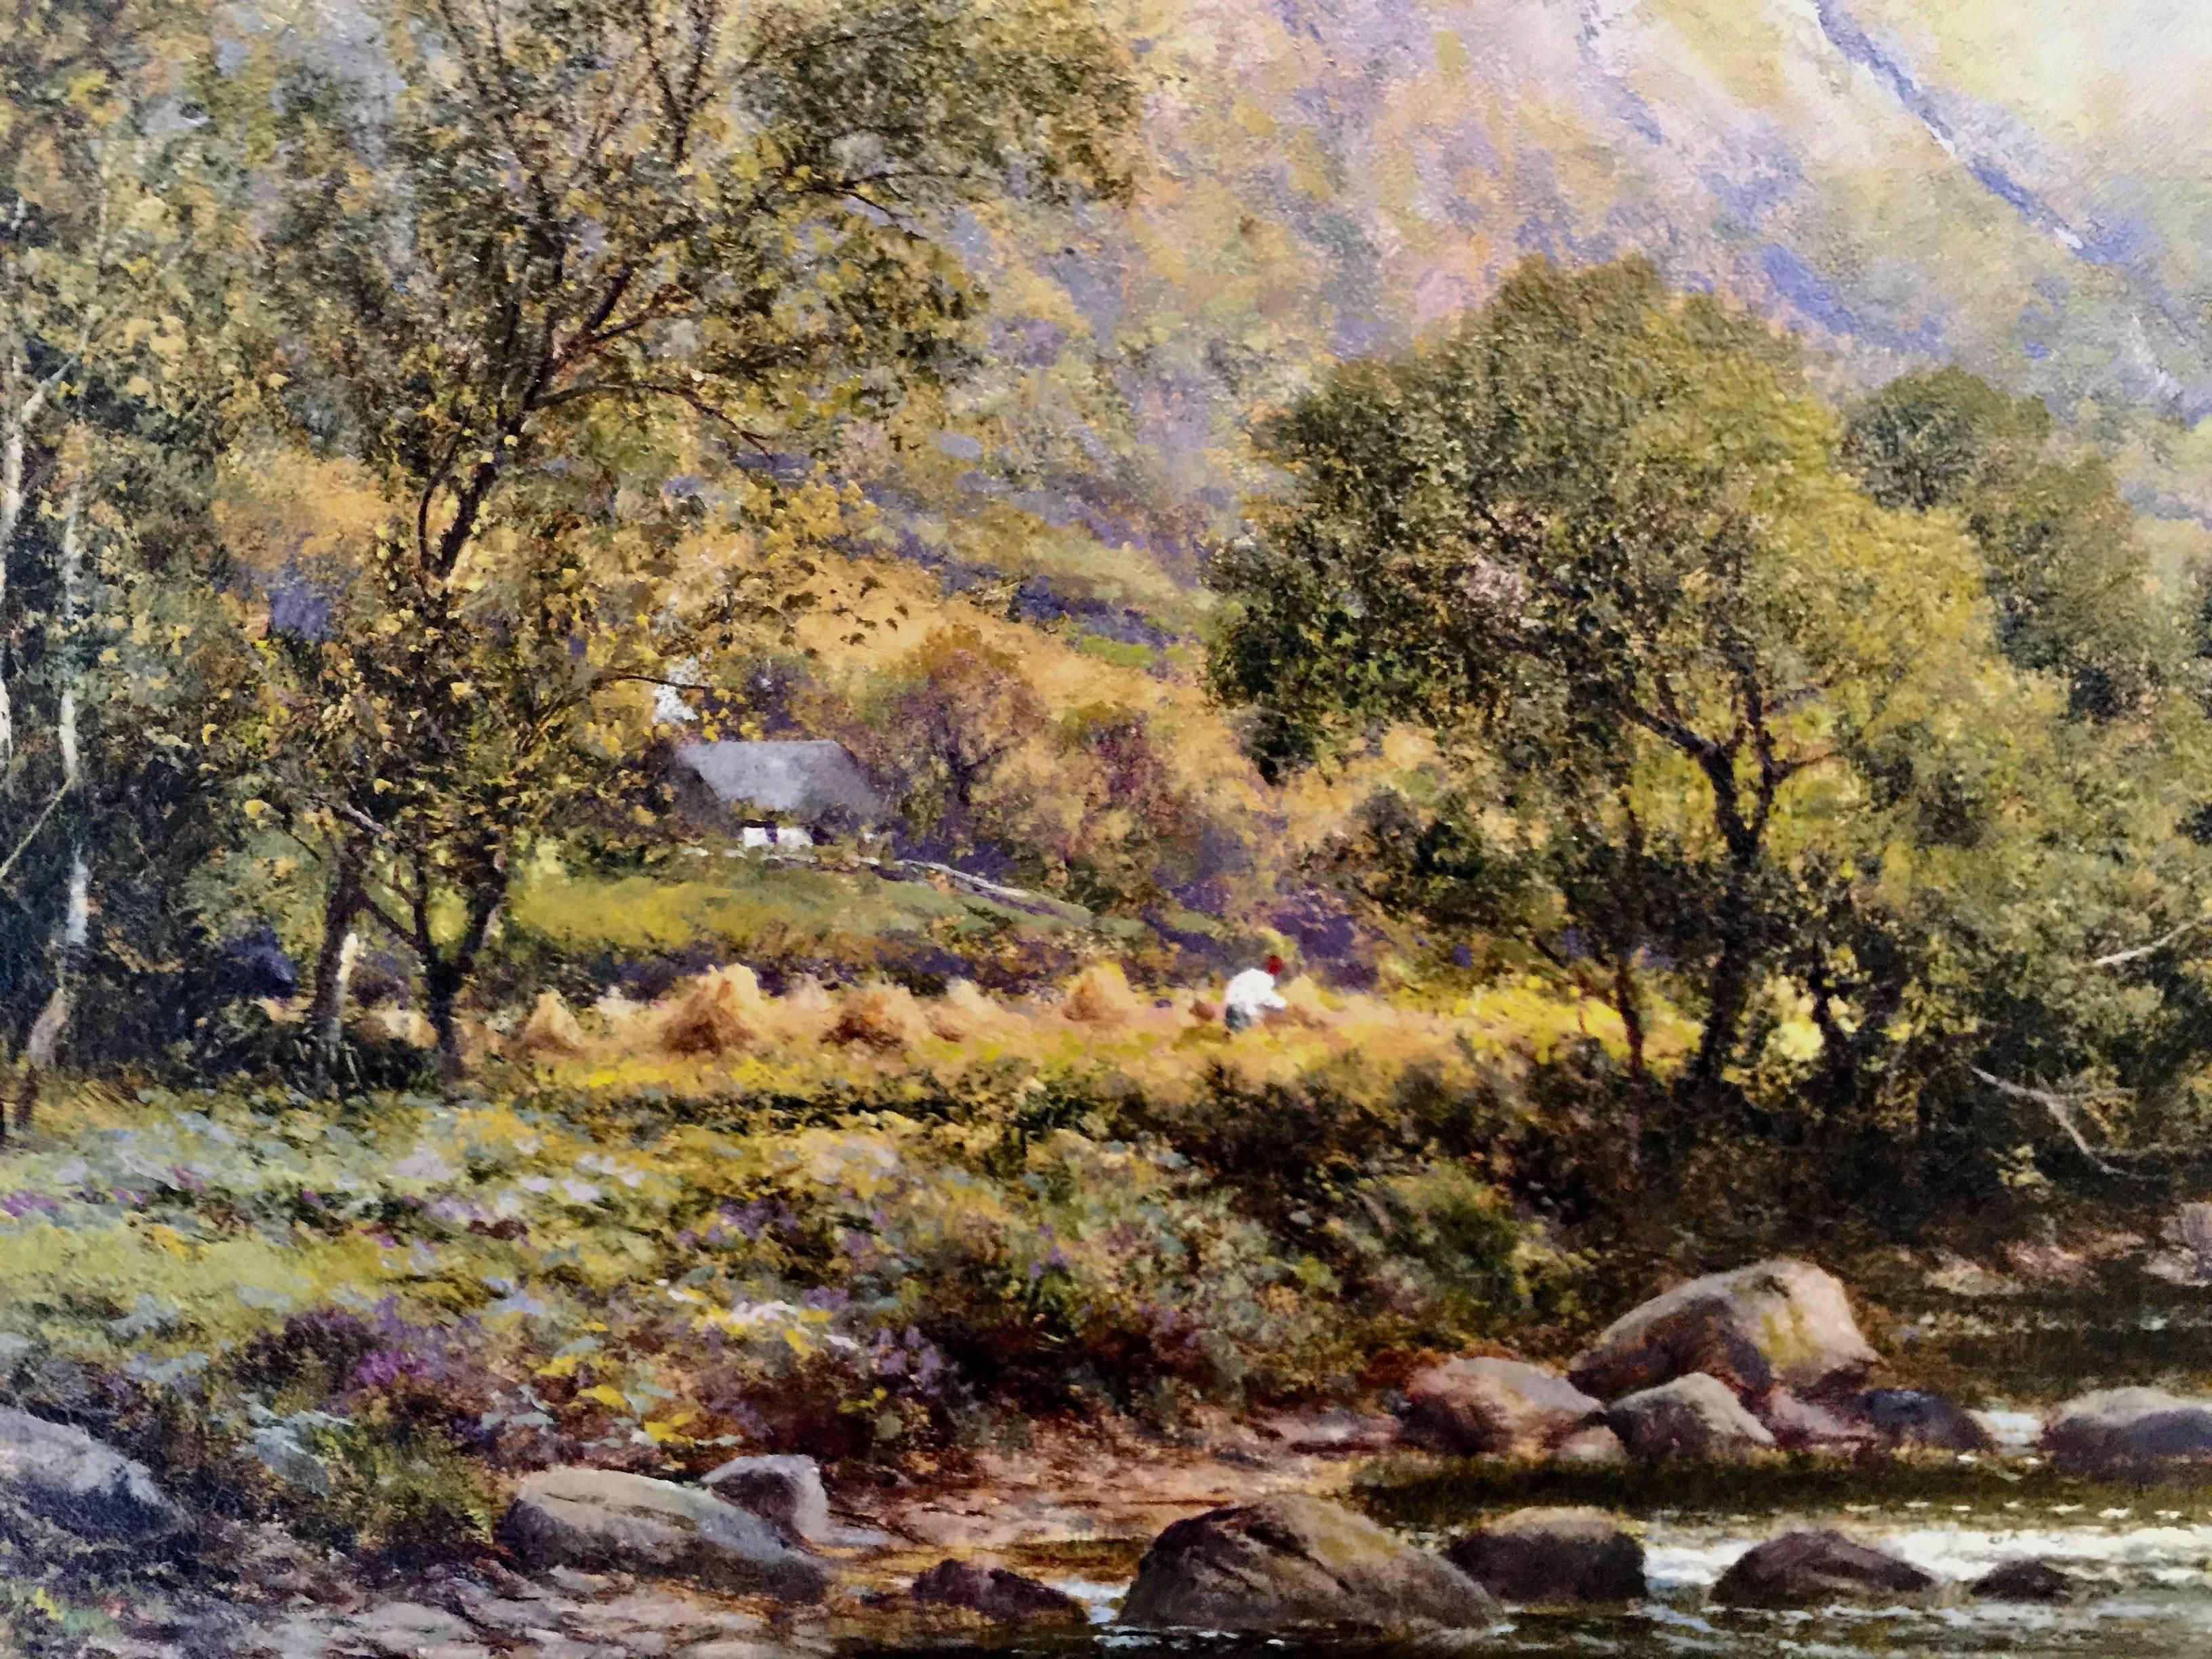  Victorian English or Welsh River landscape with a fisherman and harvest scene. - Painting by Alfred Augustus Glendening Snr